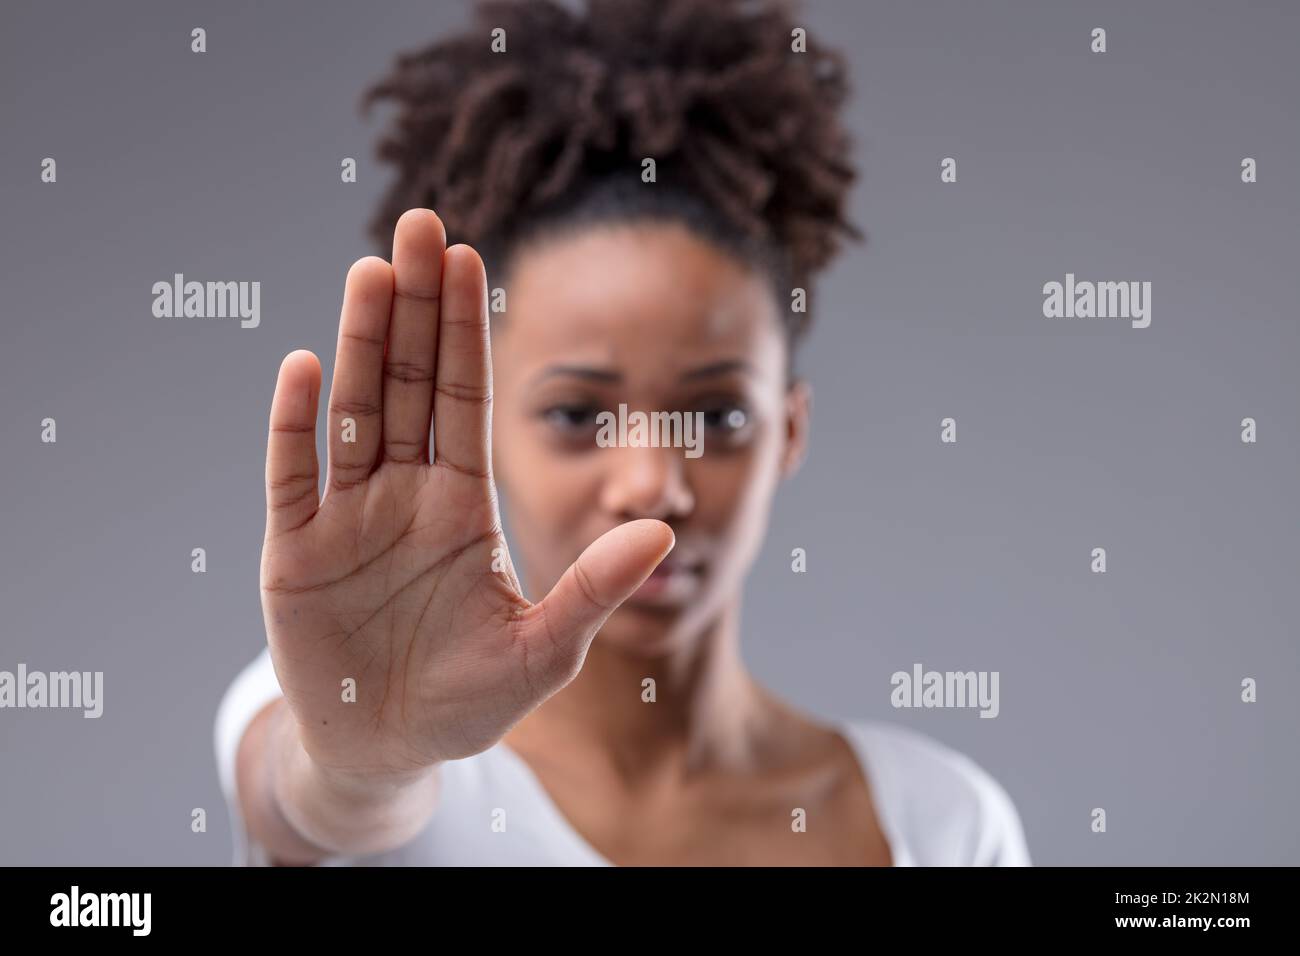 Attractive young African woman giving halt gesture Stock Photo